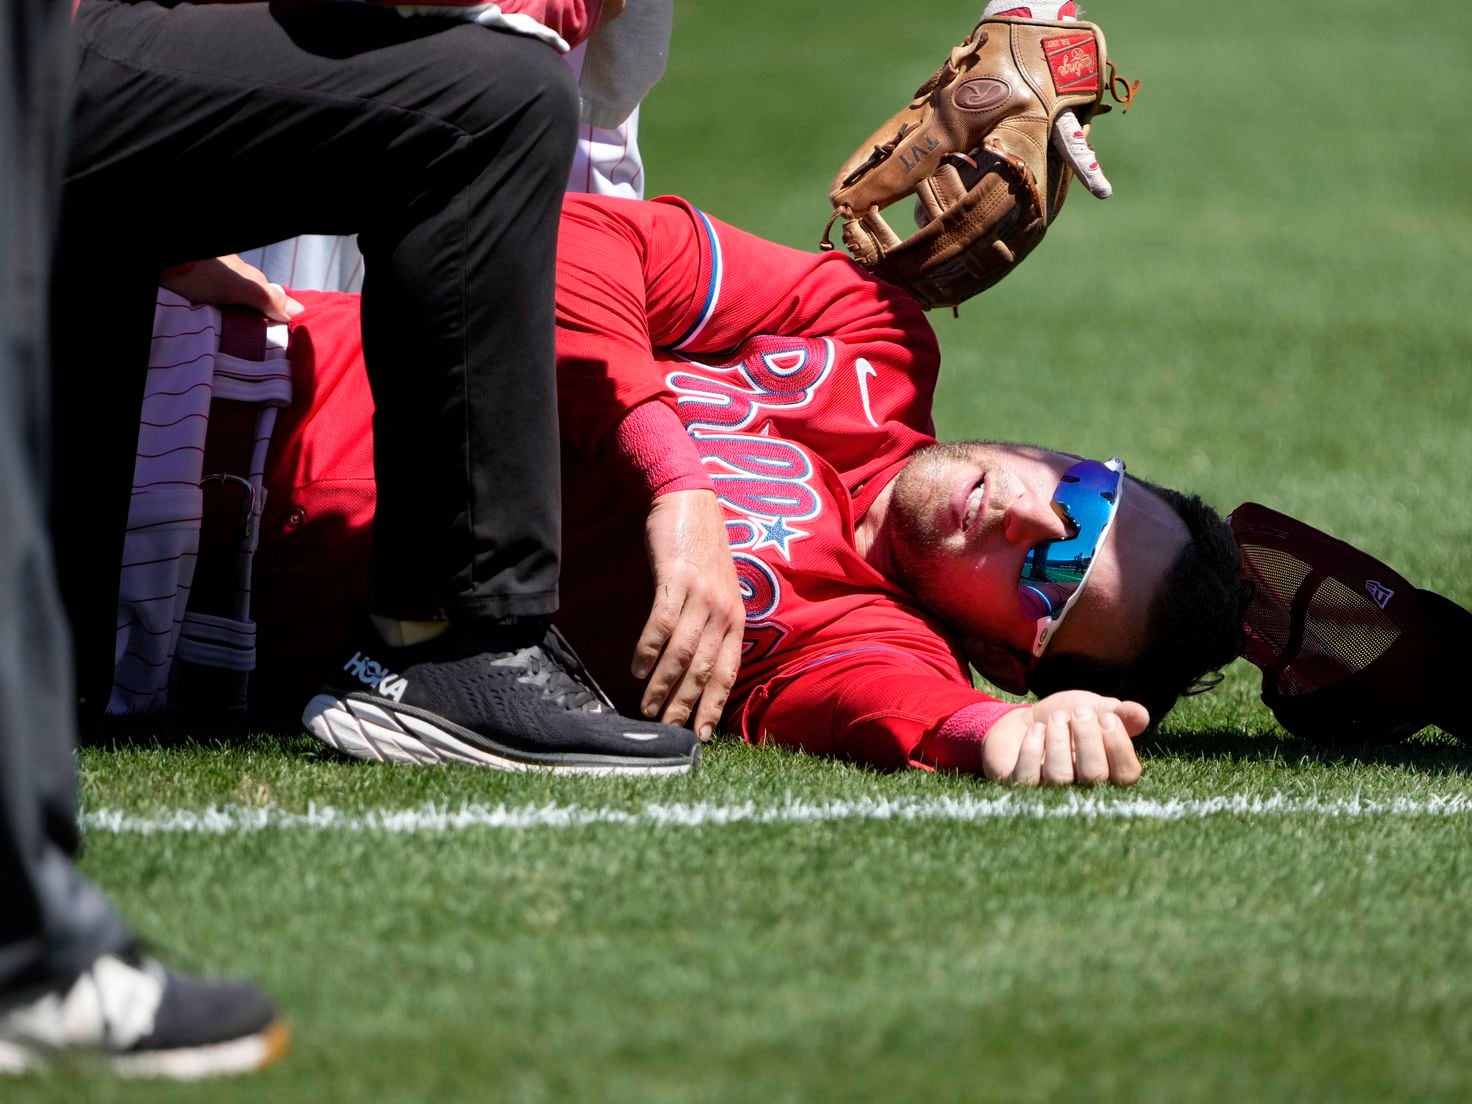 Wife of Phillies' Rhys Hoskins heartbroken over his torn ACL